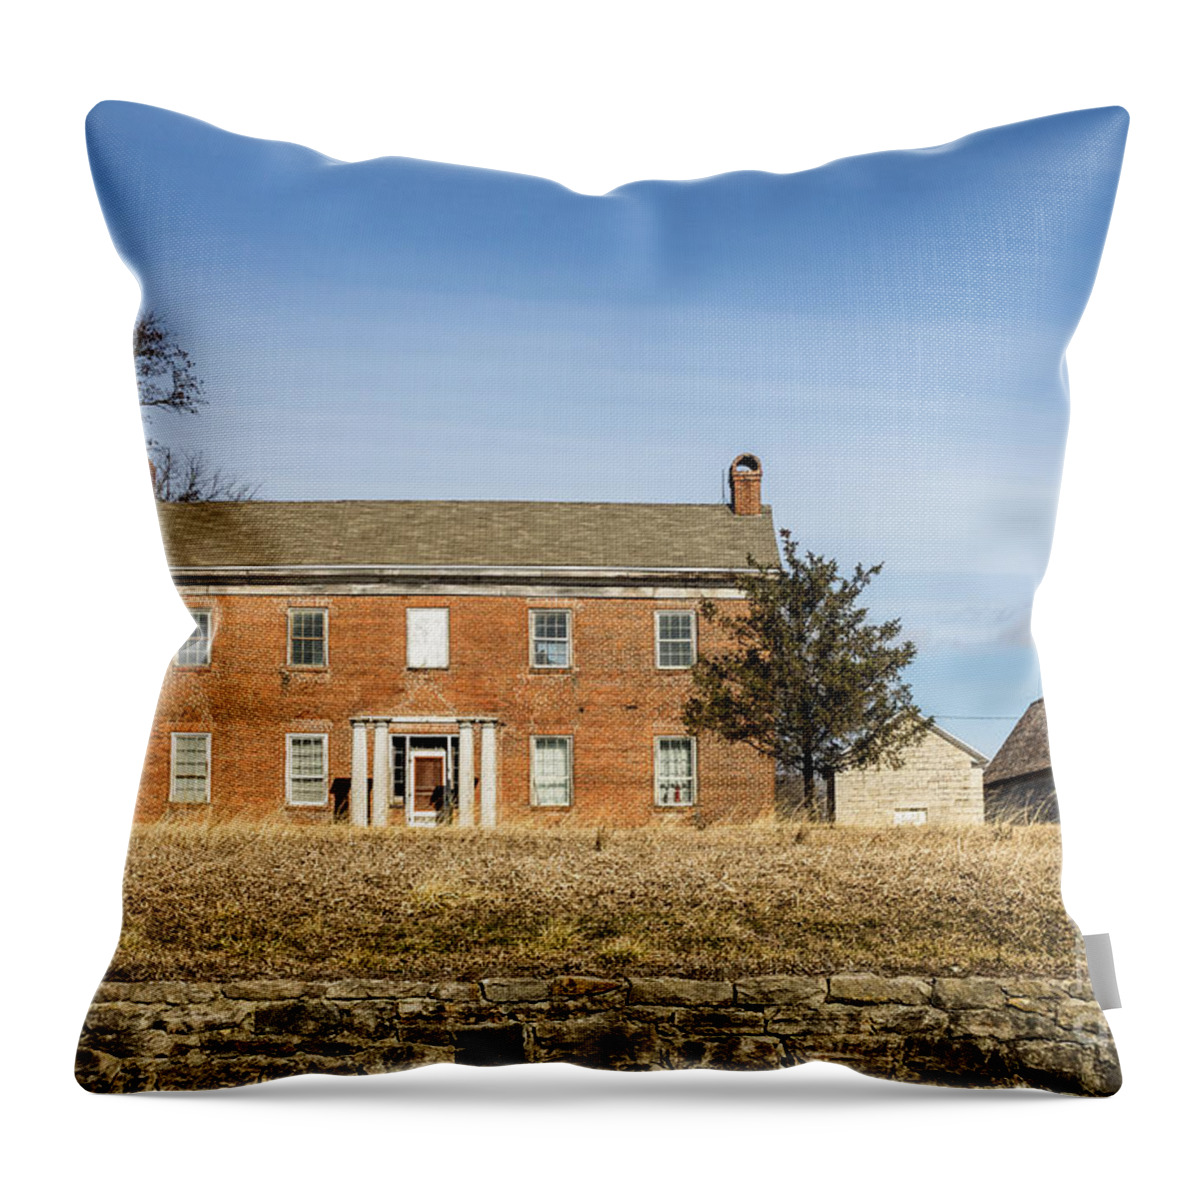 Abandoned Throw Pillow featuring the photograph Abandoned Farm by Imagery by Charly